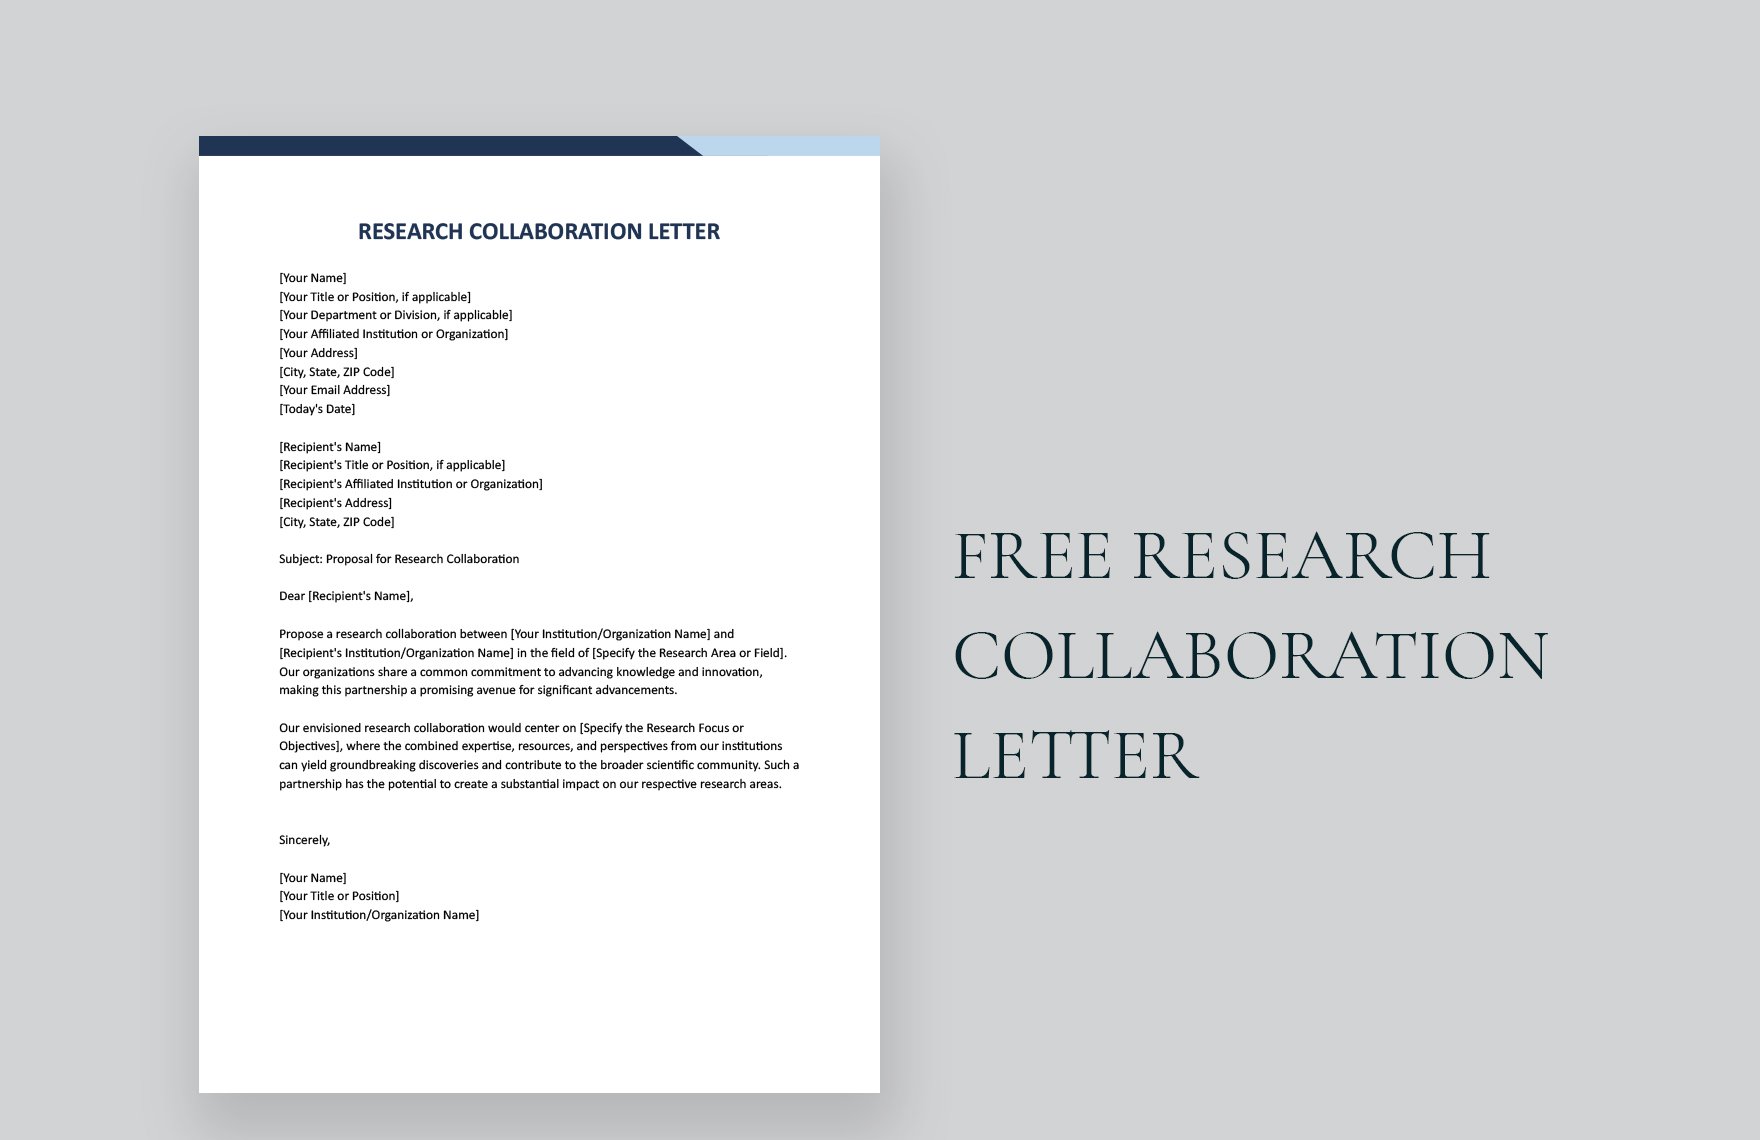 Research Collaboration Letter in Word, Google Docs